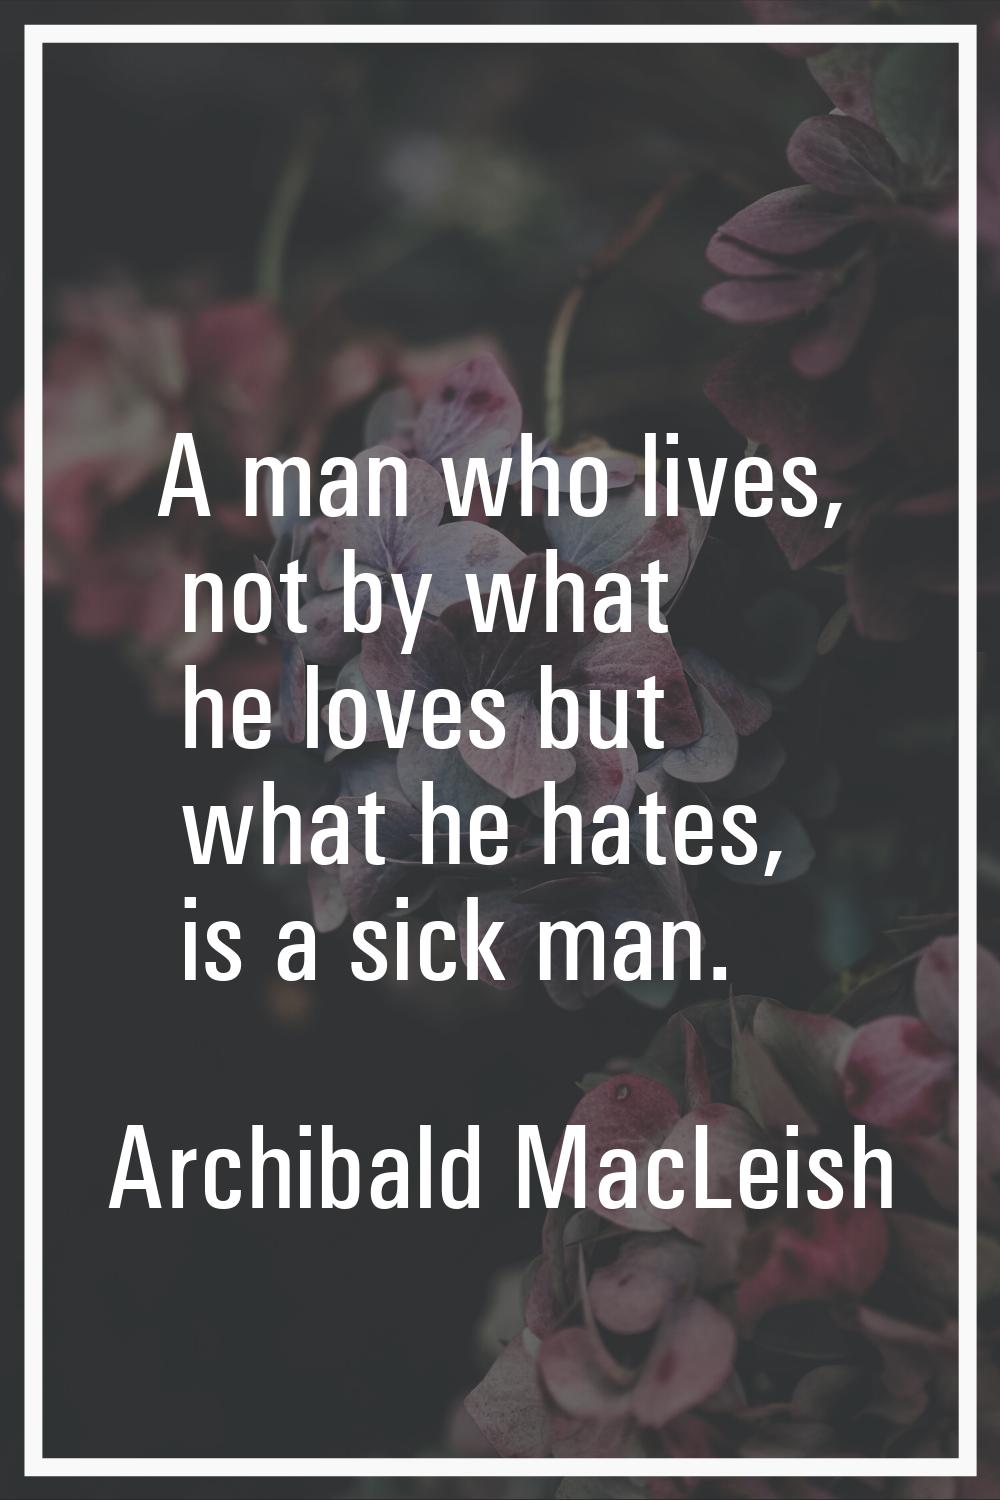 A man who lives, not by what he loves but what he hates, is a sick man.